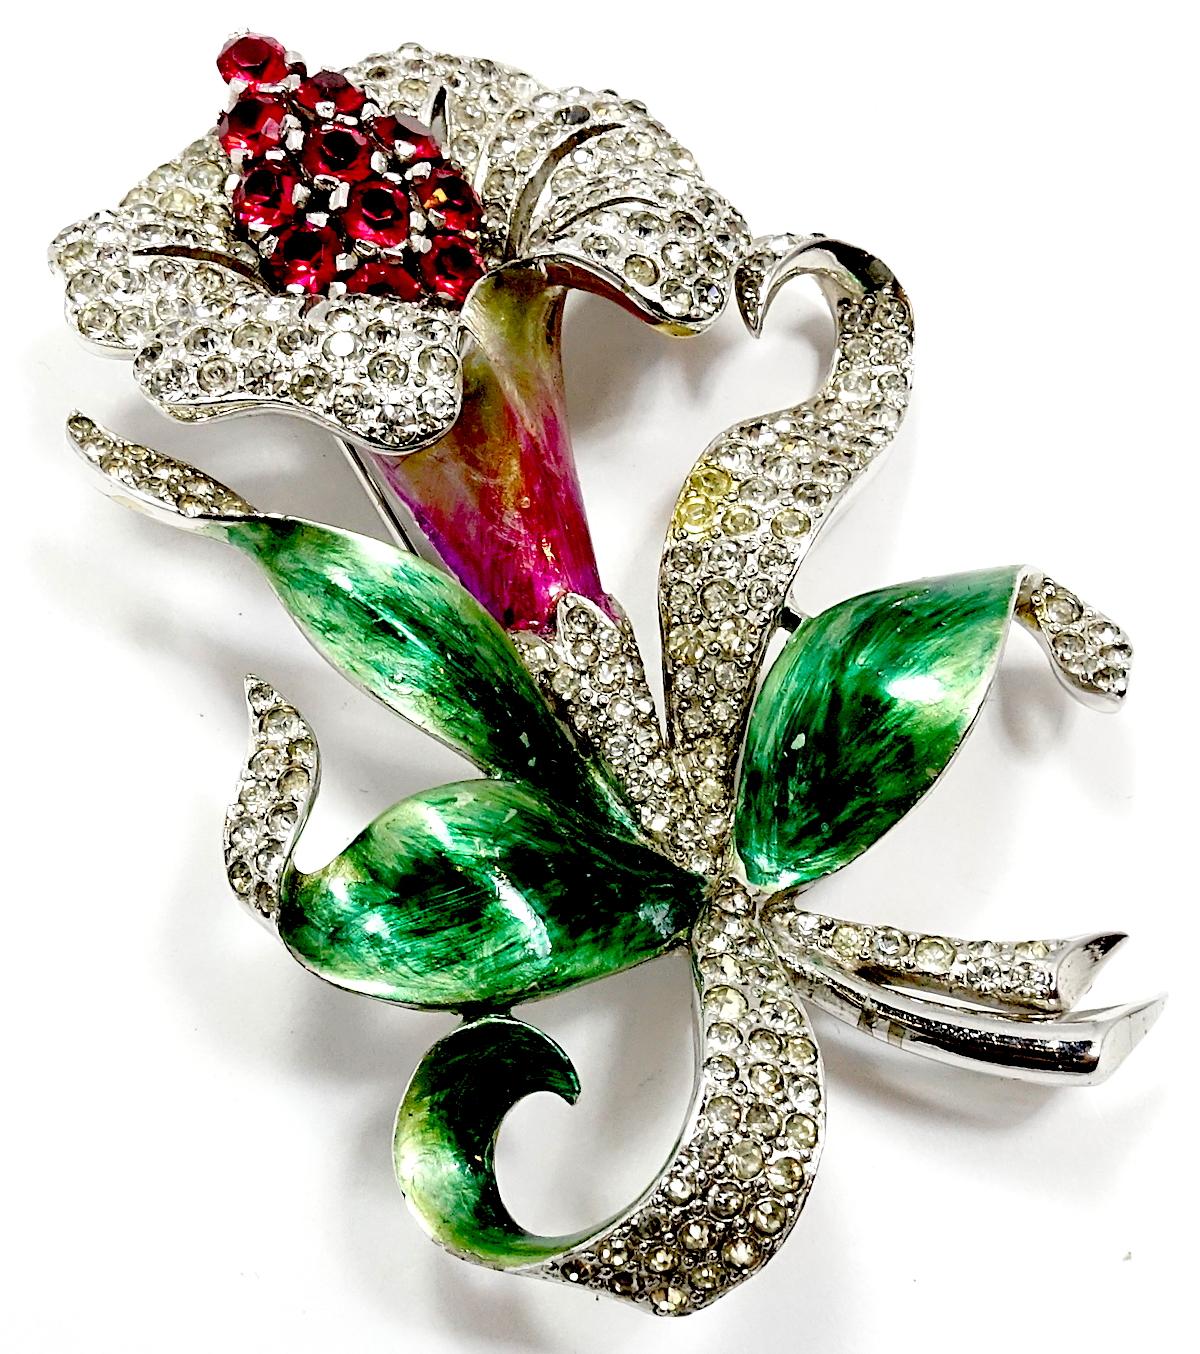 This rare 1940s vintage Marcel Boucher orchid brooch has a 3-dimensional orchid with the leaves with Boucher’s famous enameling of red near the flower and green on the outward leaves. Clear crystals accentuate the leaves and the flower with red